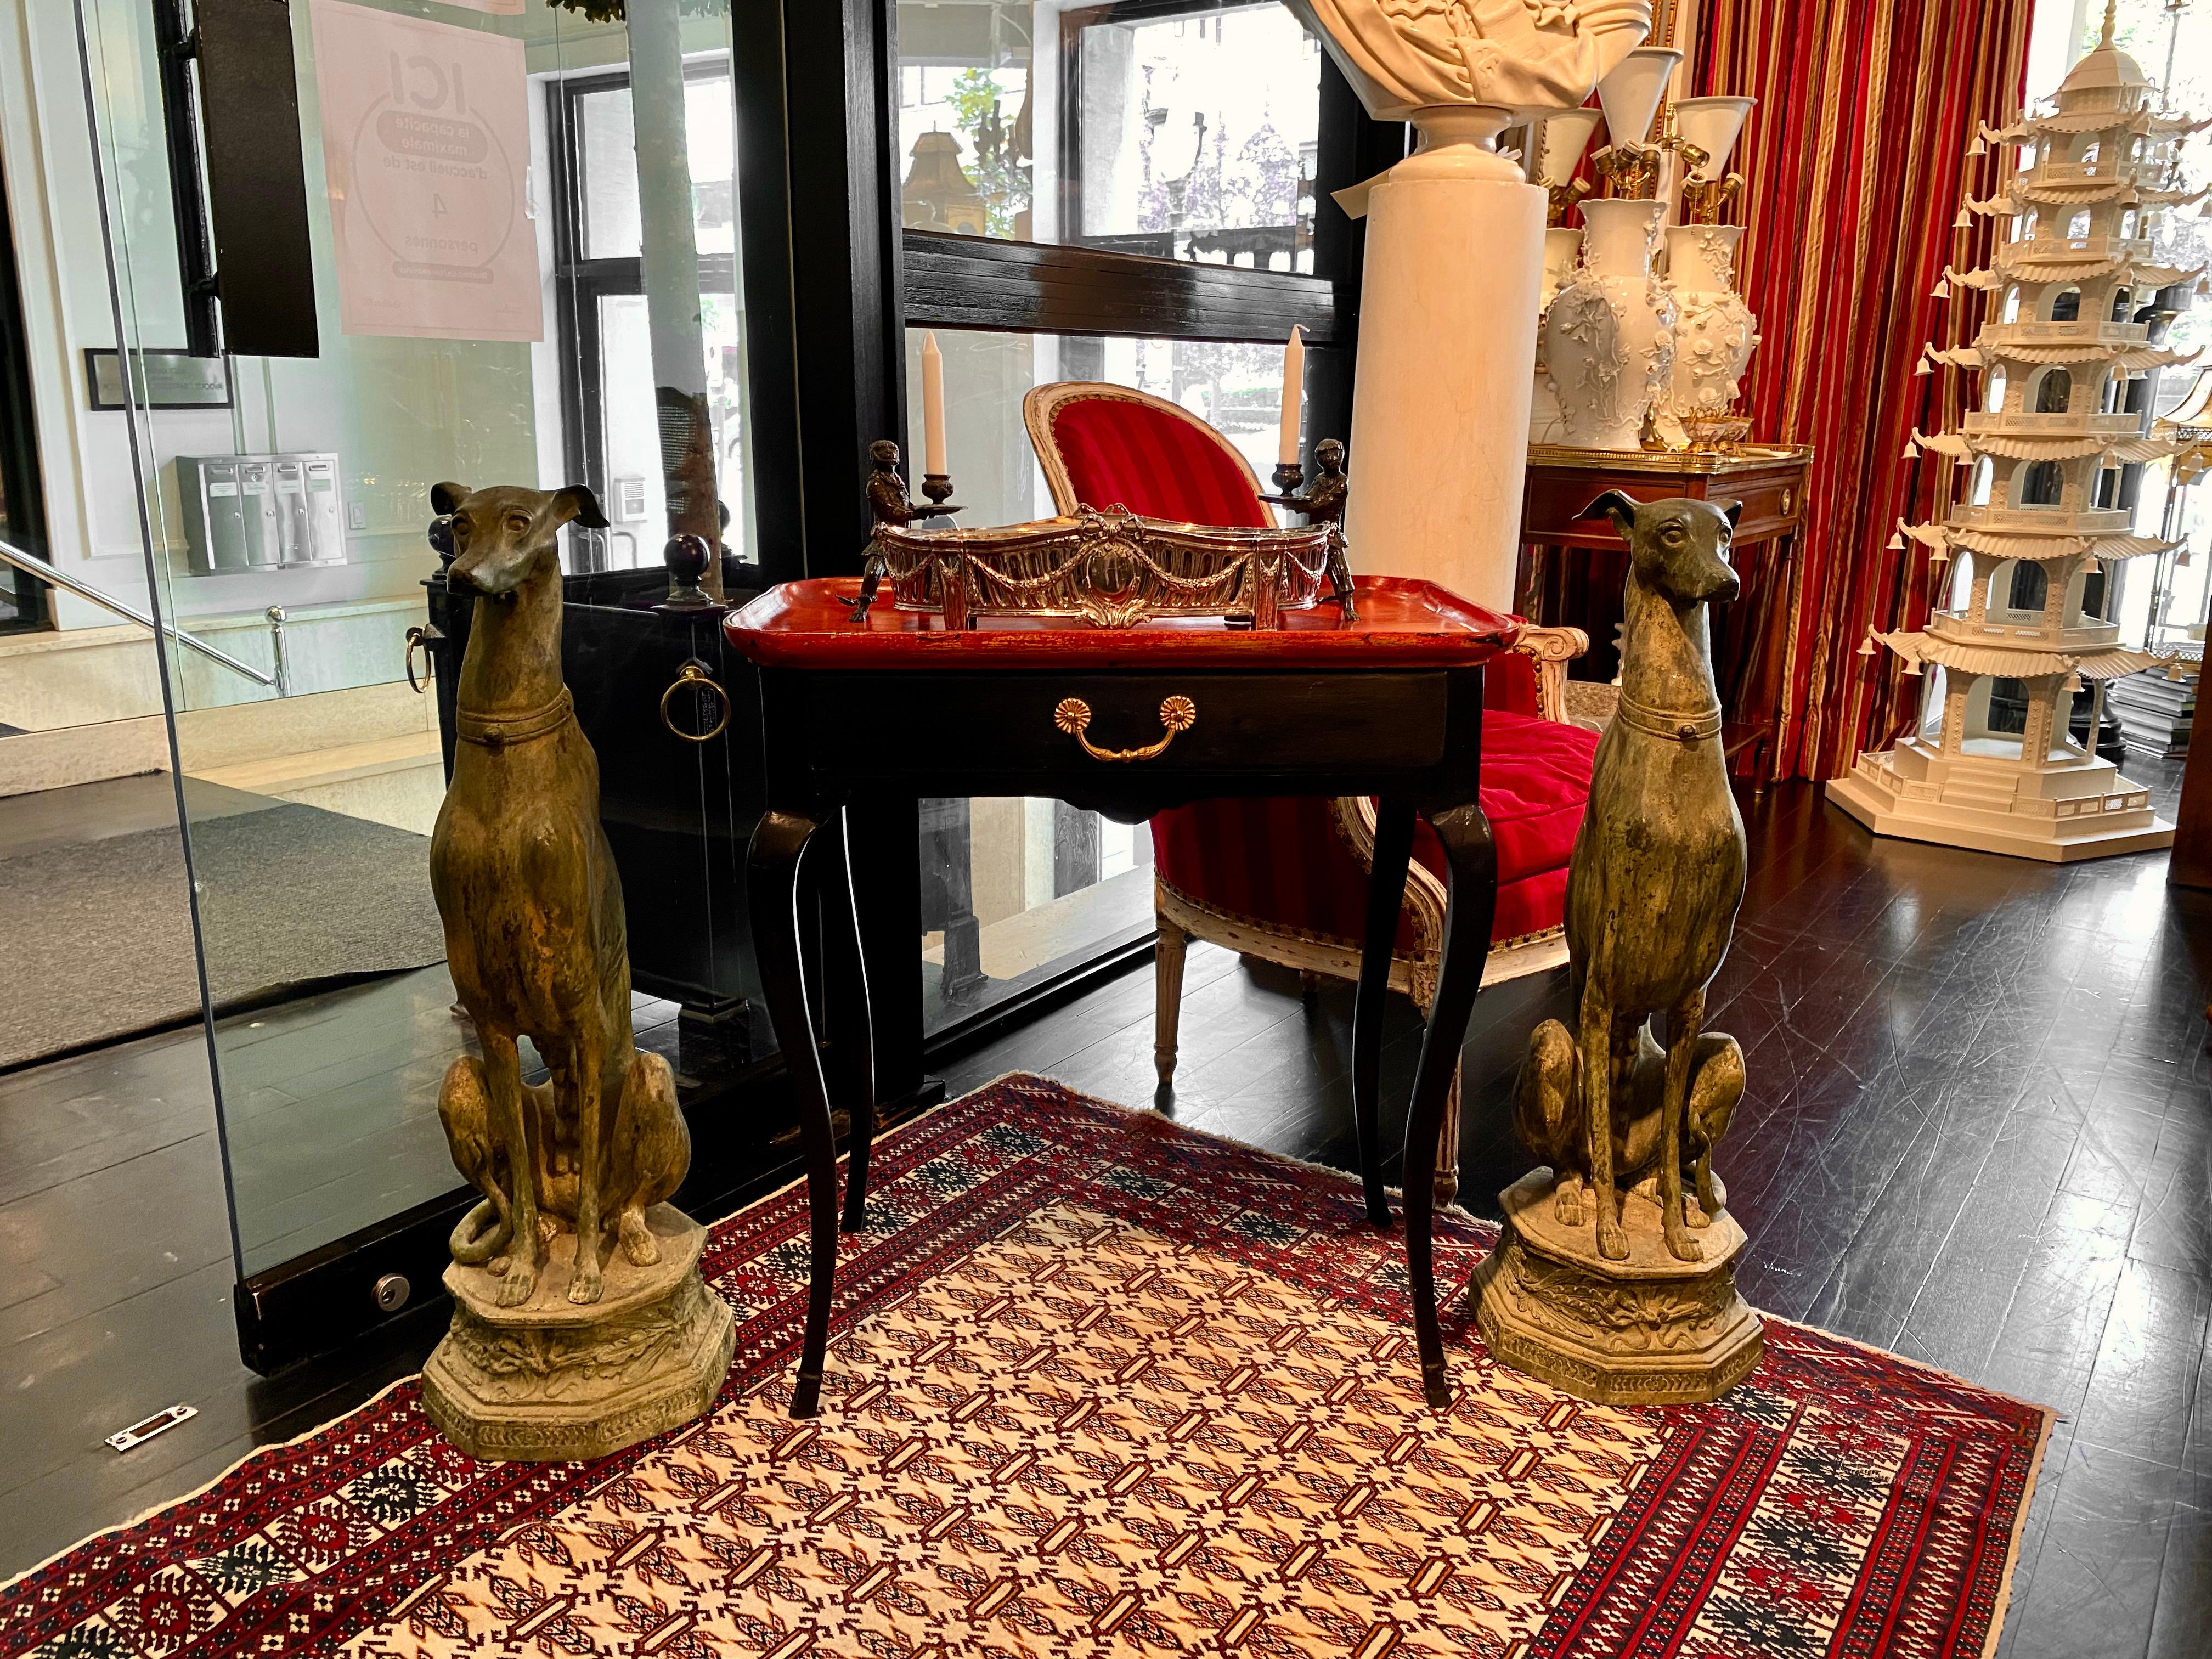 French 18th century Provencal tray top table with slender cabriole legs from the late 18th century, typical of the Louis XV era. Lacquered and ebonized black satin finish beautifully contrasts the bright red rectangular tray top. The tray top with